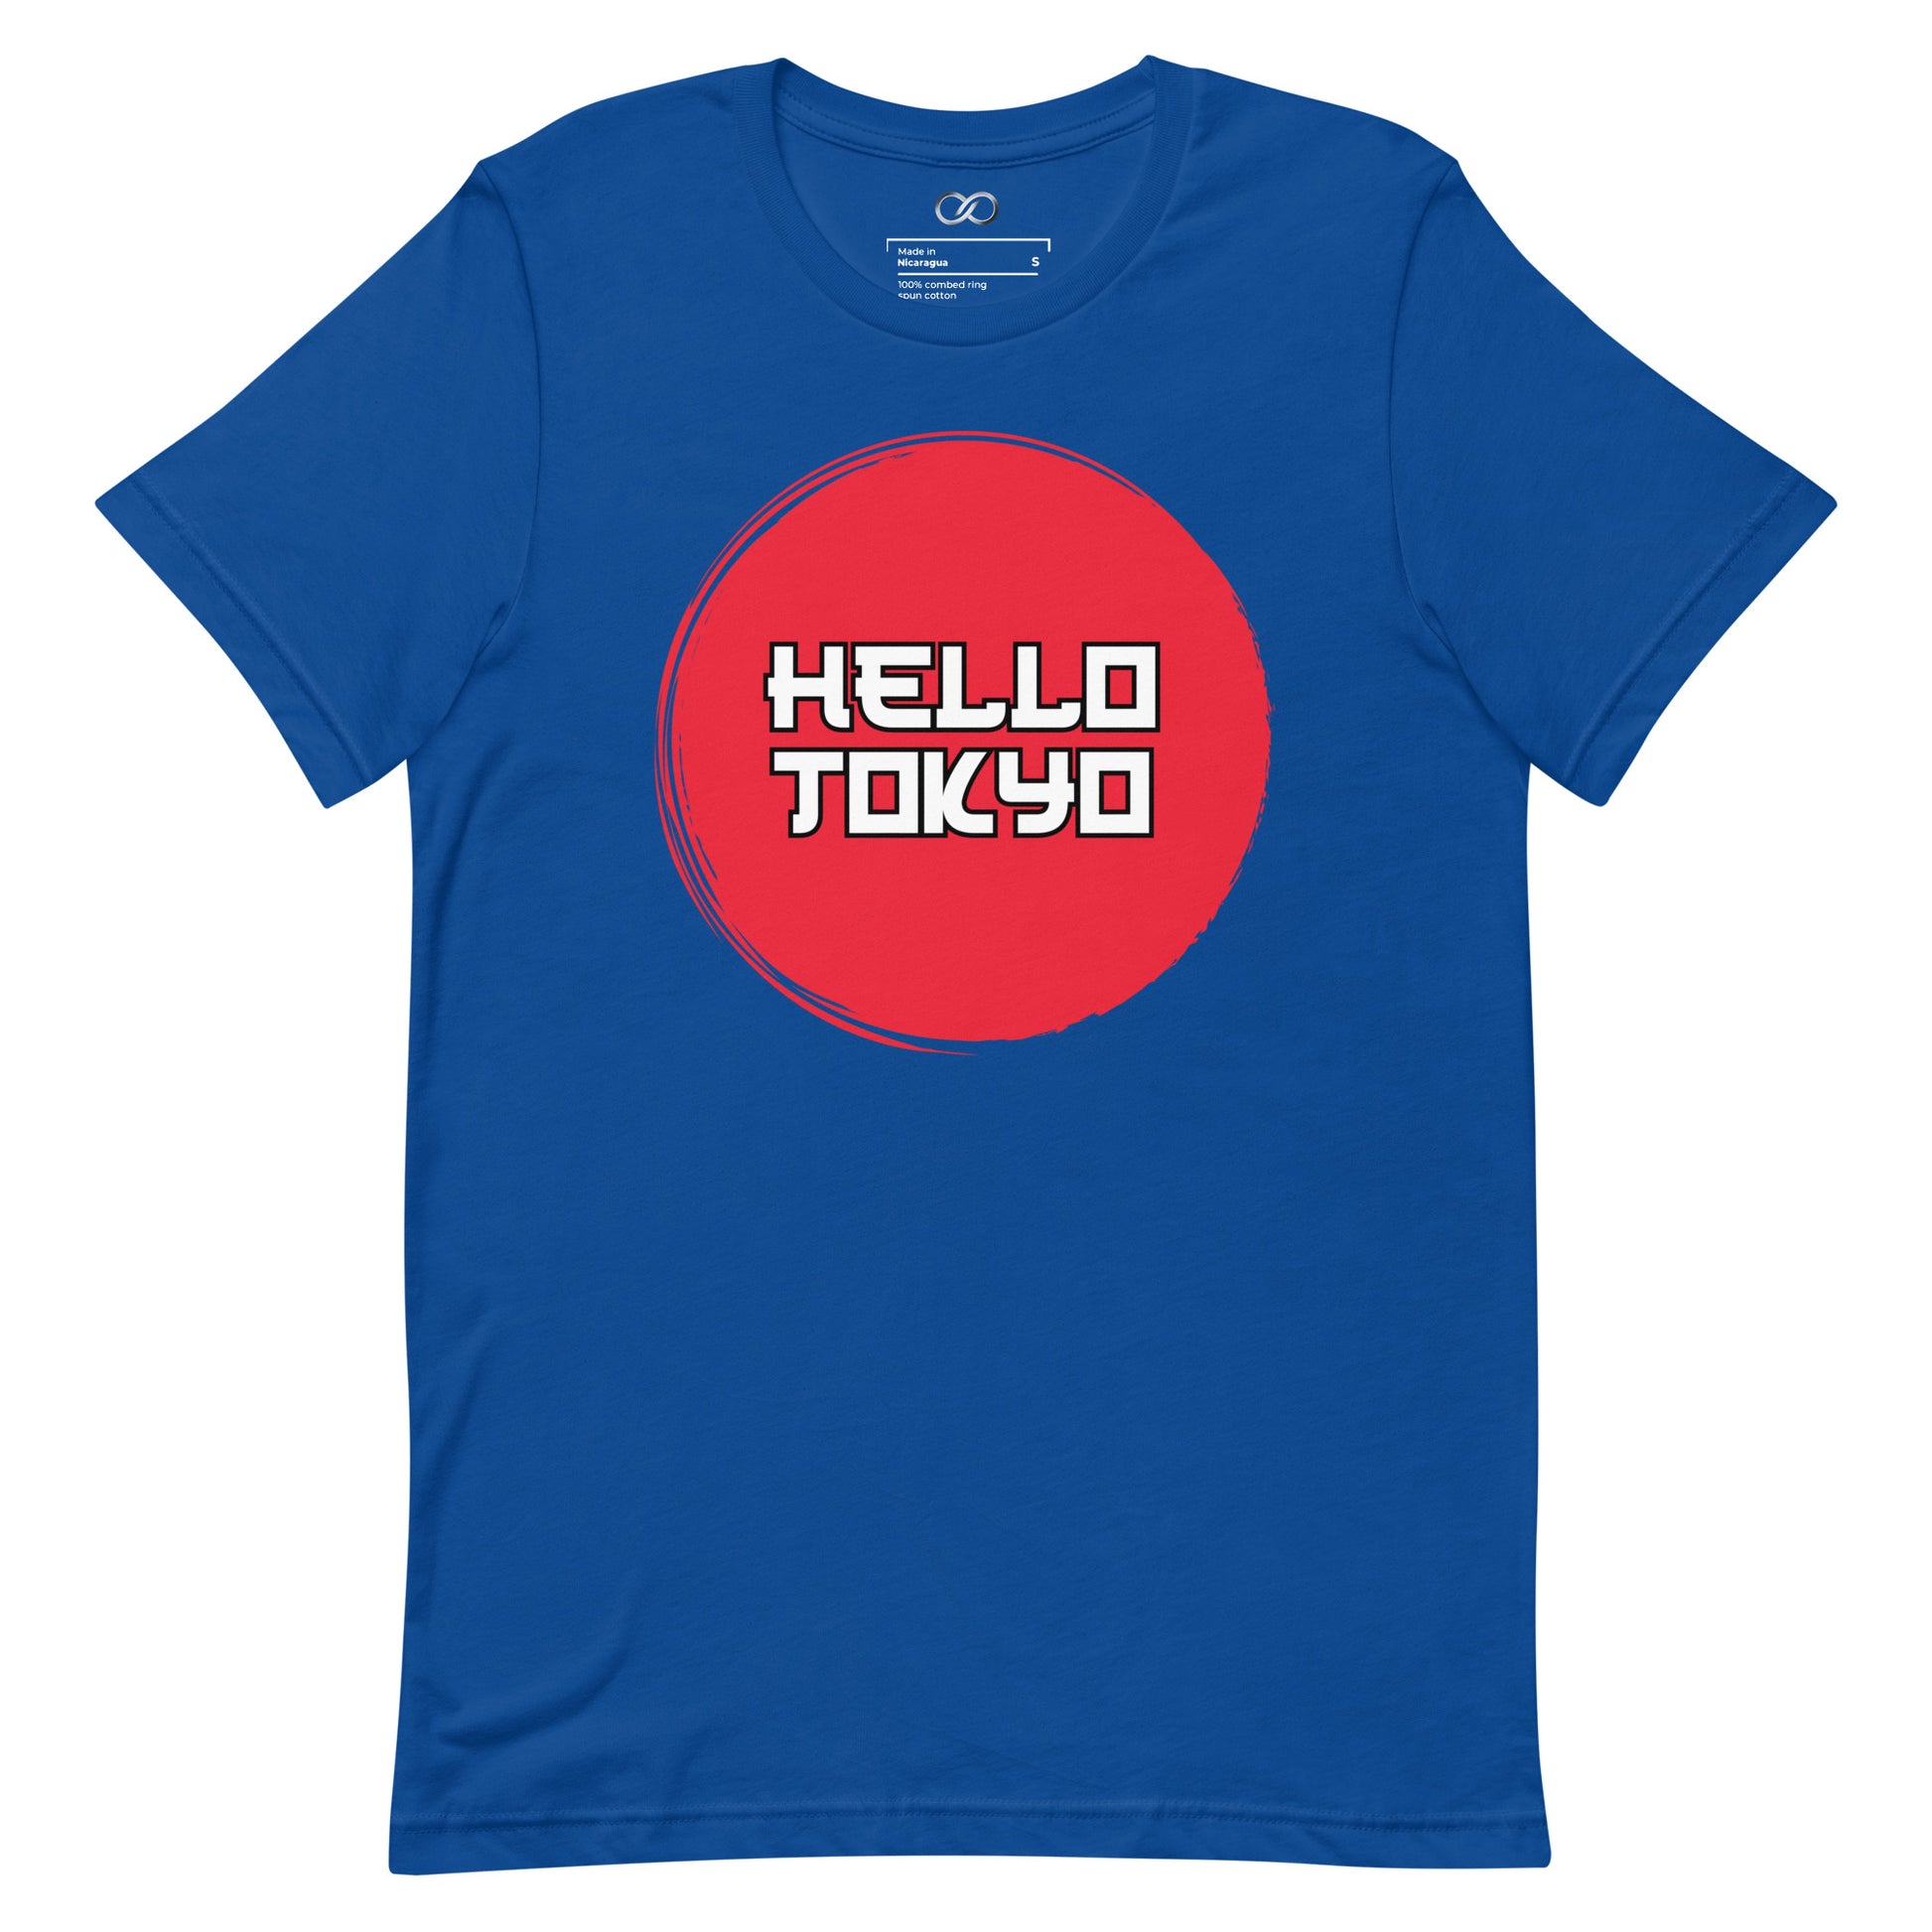 A full view of a royal blue t-shirt with 'Hello Tokyo' text inside a striking red circle, laid flat to display the design.